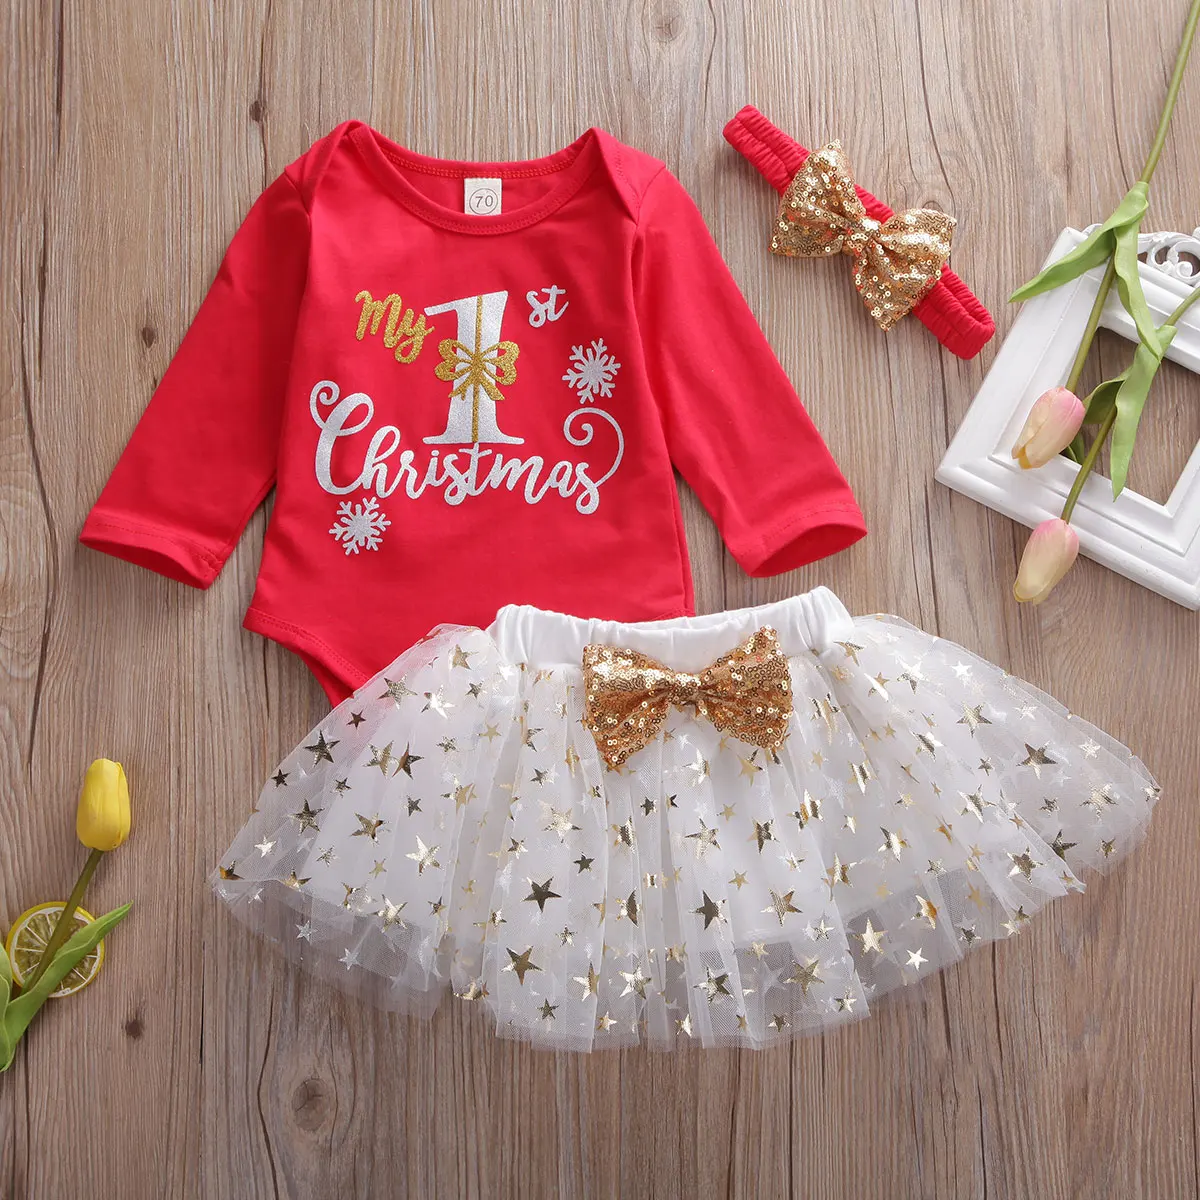 

Pudcoco Newborn Baby Girl Clothes My 1st Christmas Long Sleeve Romper Tops Sequin Stars Tulle Mini Skirt Headband 3Pcs Outfits